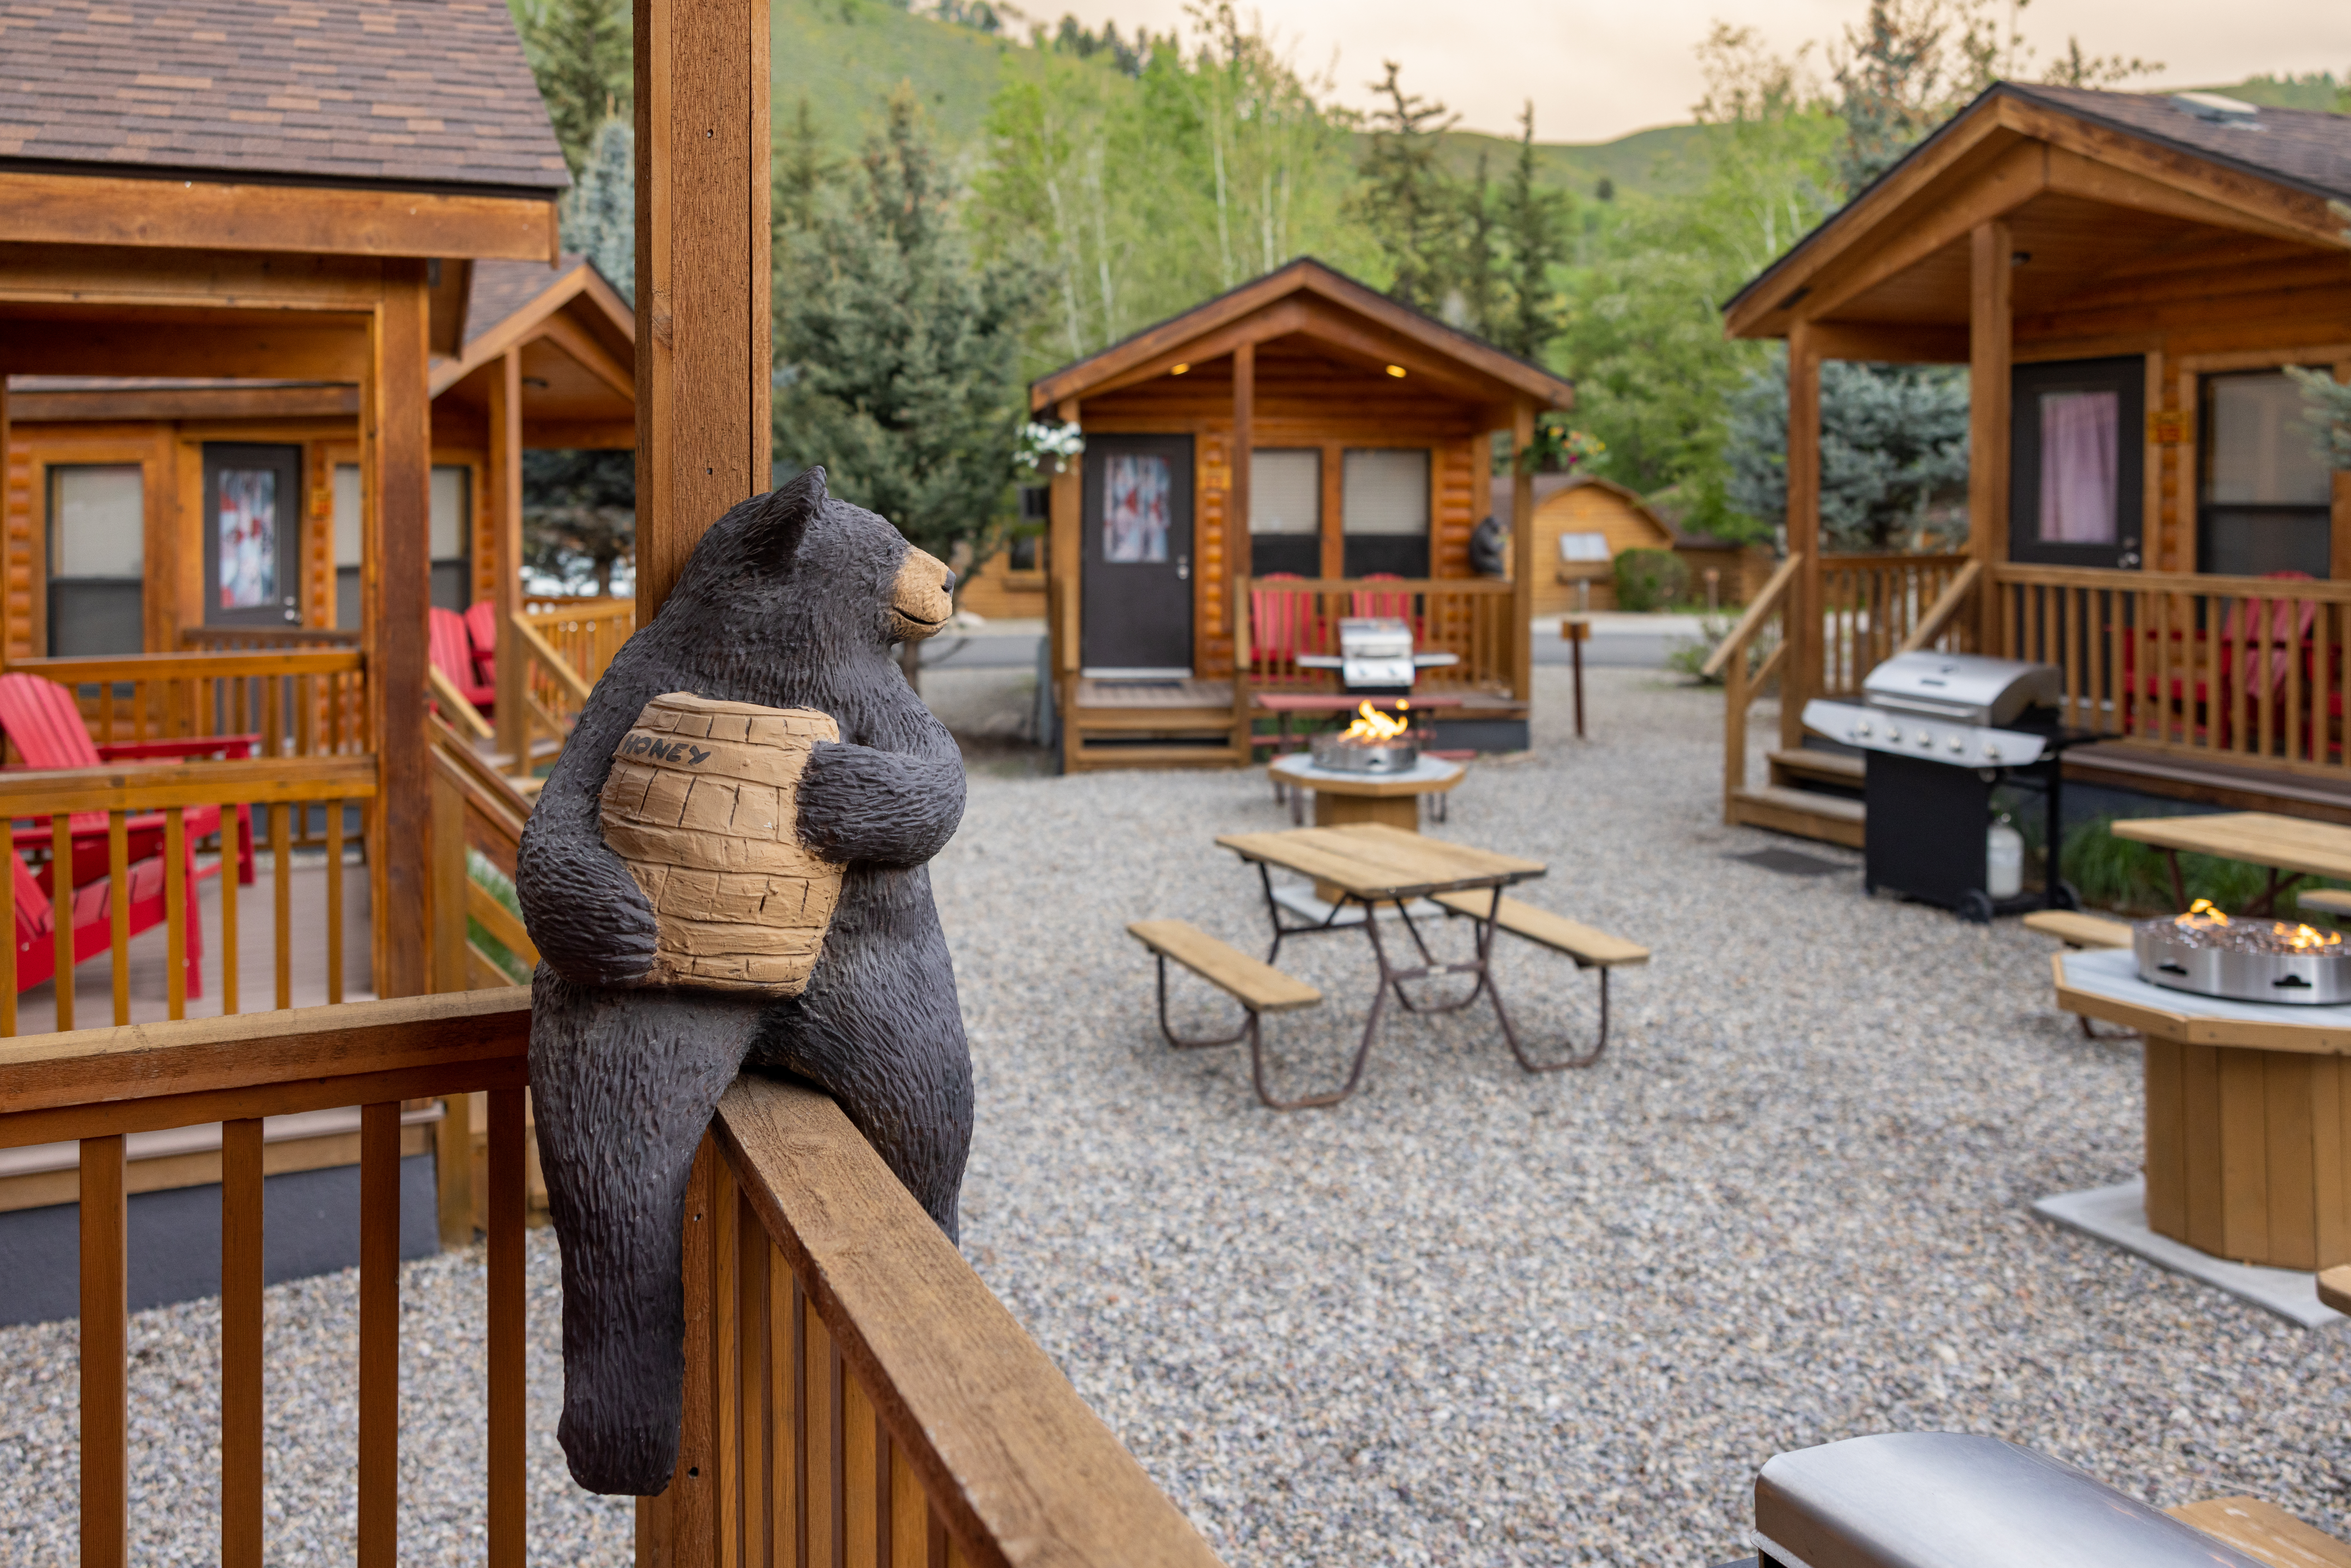 A statue of a black bear holding a jar of honey perched on the porch of a log cabin at Snake River Cabins & RV Village.